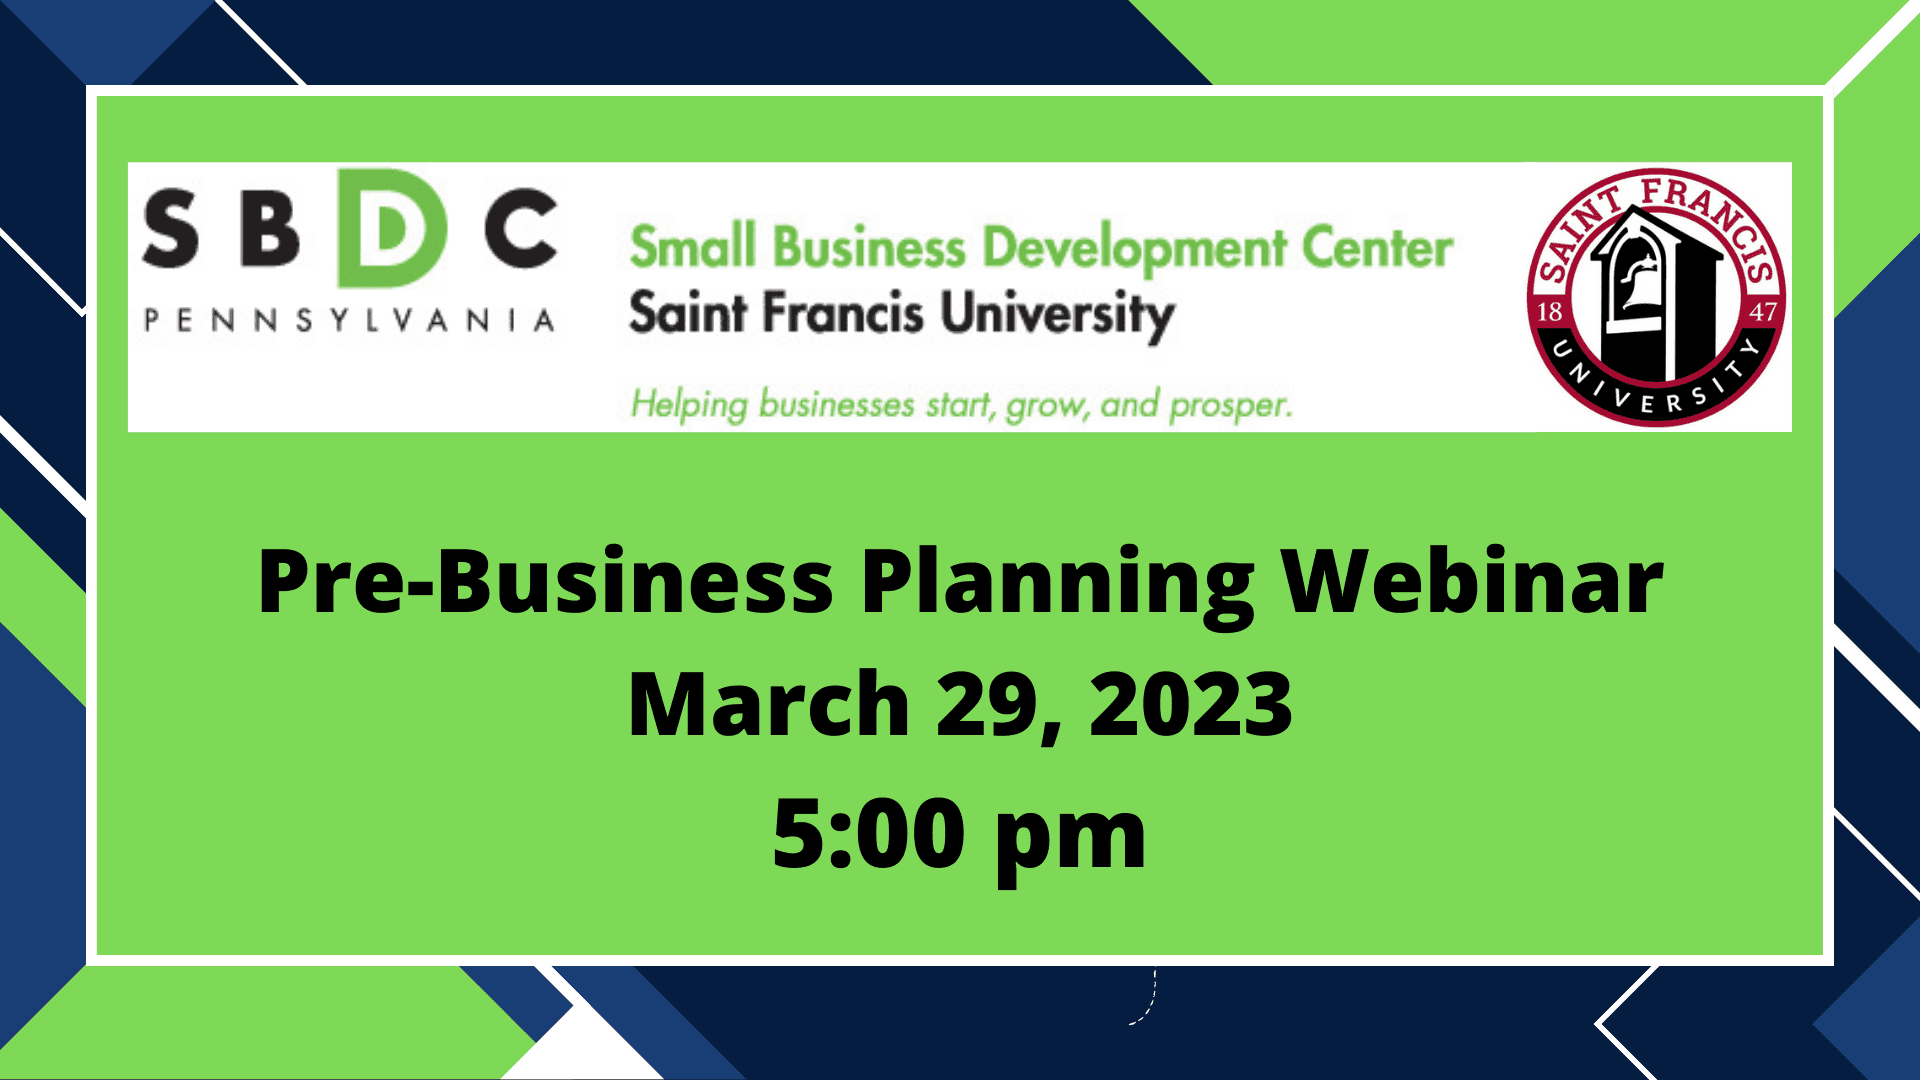 The First Step: Pre-Business Planning Webinar